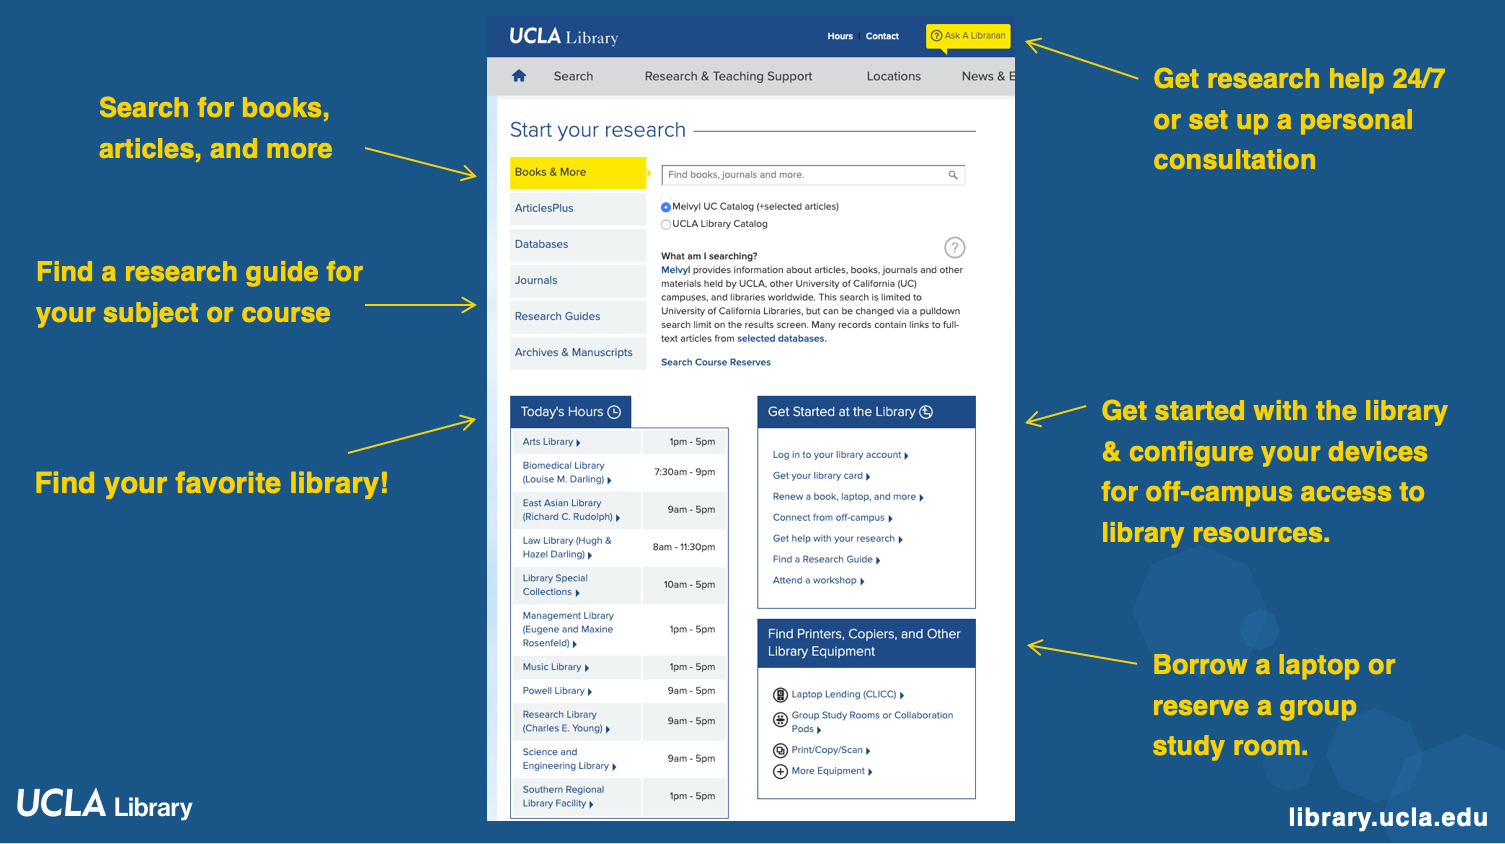 The UCLA Library homepage powerpoint slide. Highlighted links to Research and Teaching Support, Ask a Librarian, Start your research, Connect from Off-campus, and Library hours.